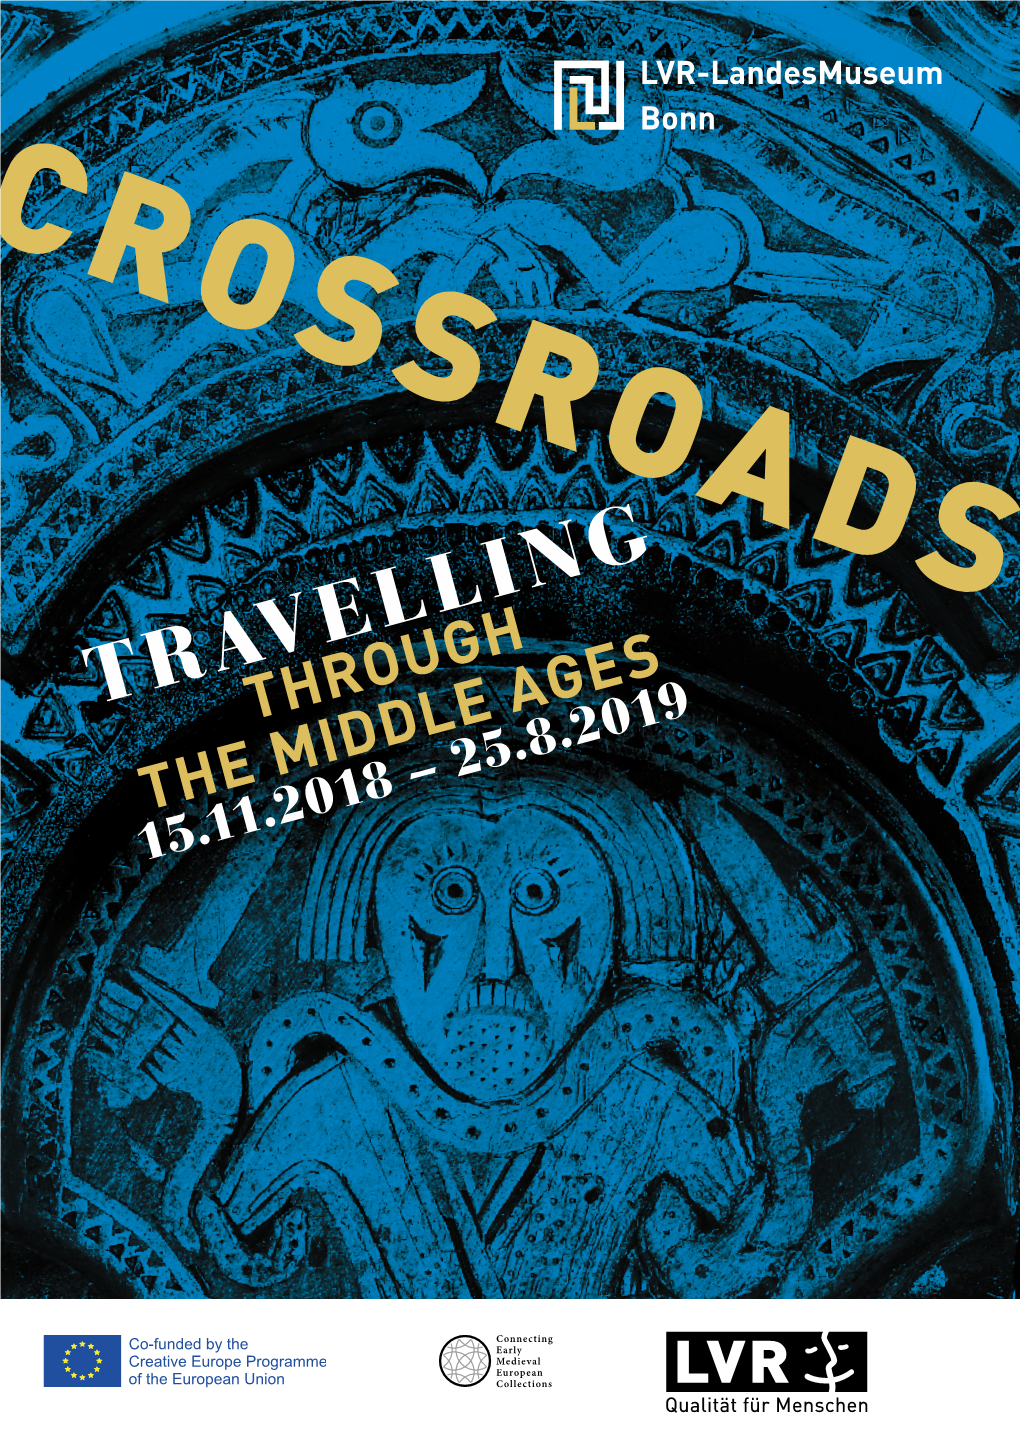 Travellingthrough the Middle Ages 15.11.2018 – 25.8.2019